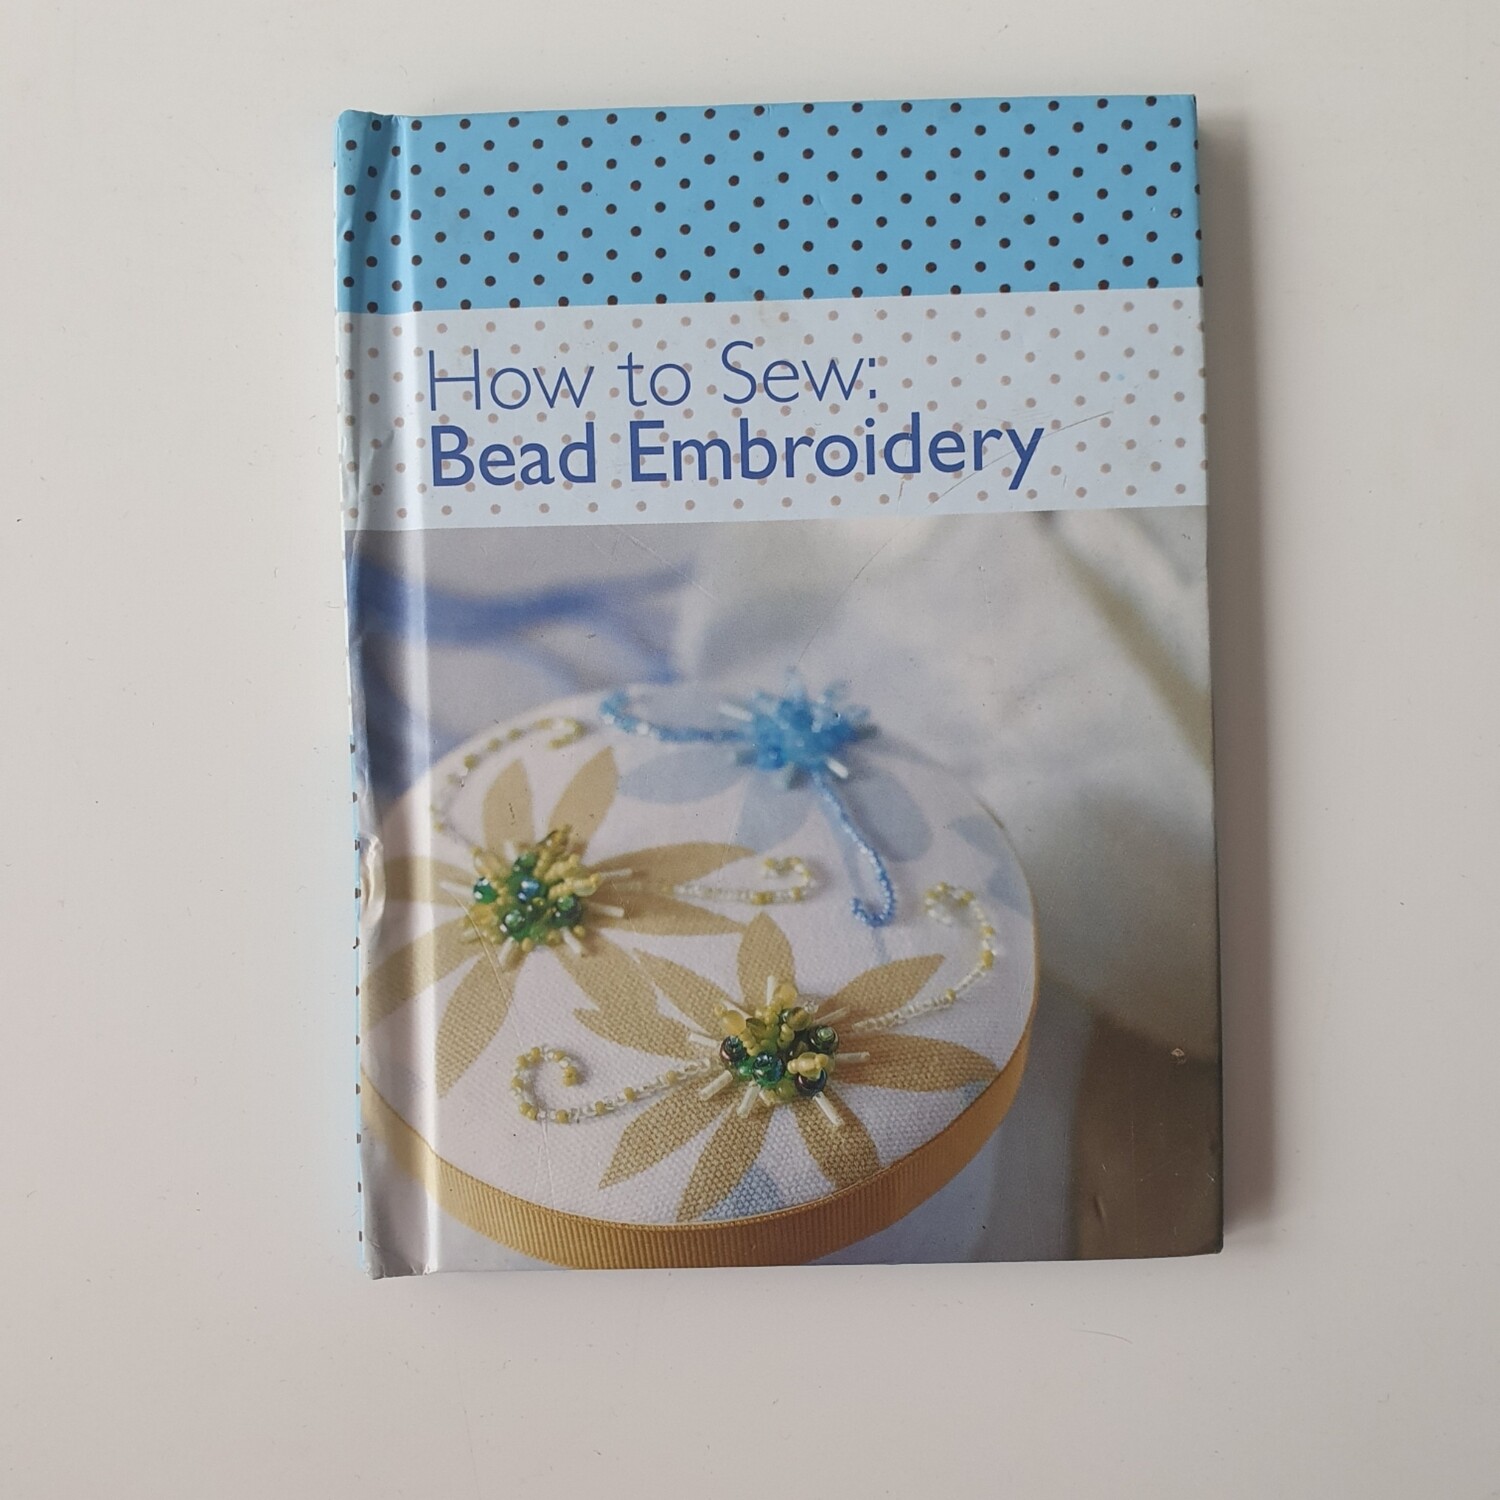 How to Sew - Bead Embroidery